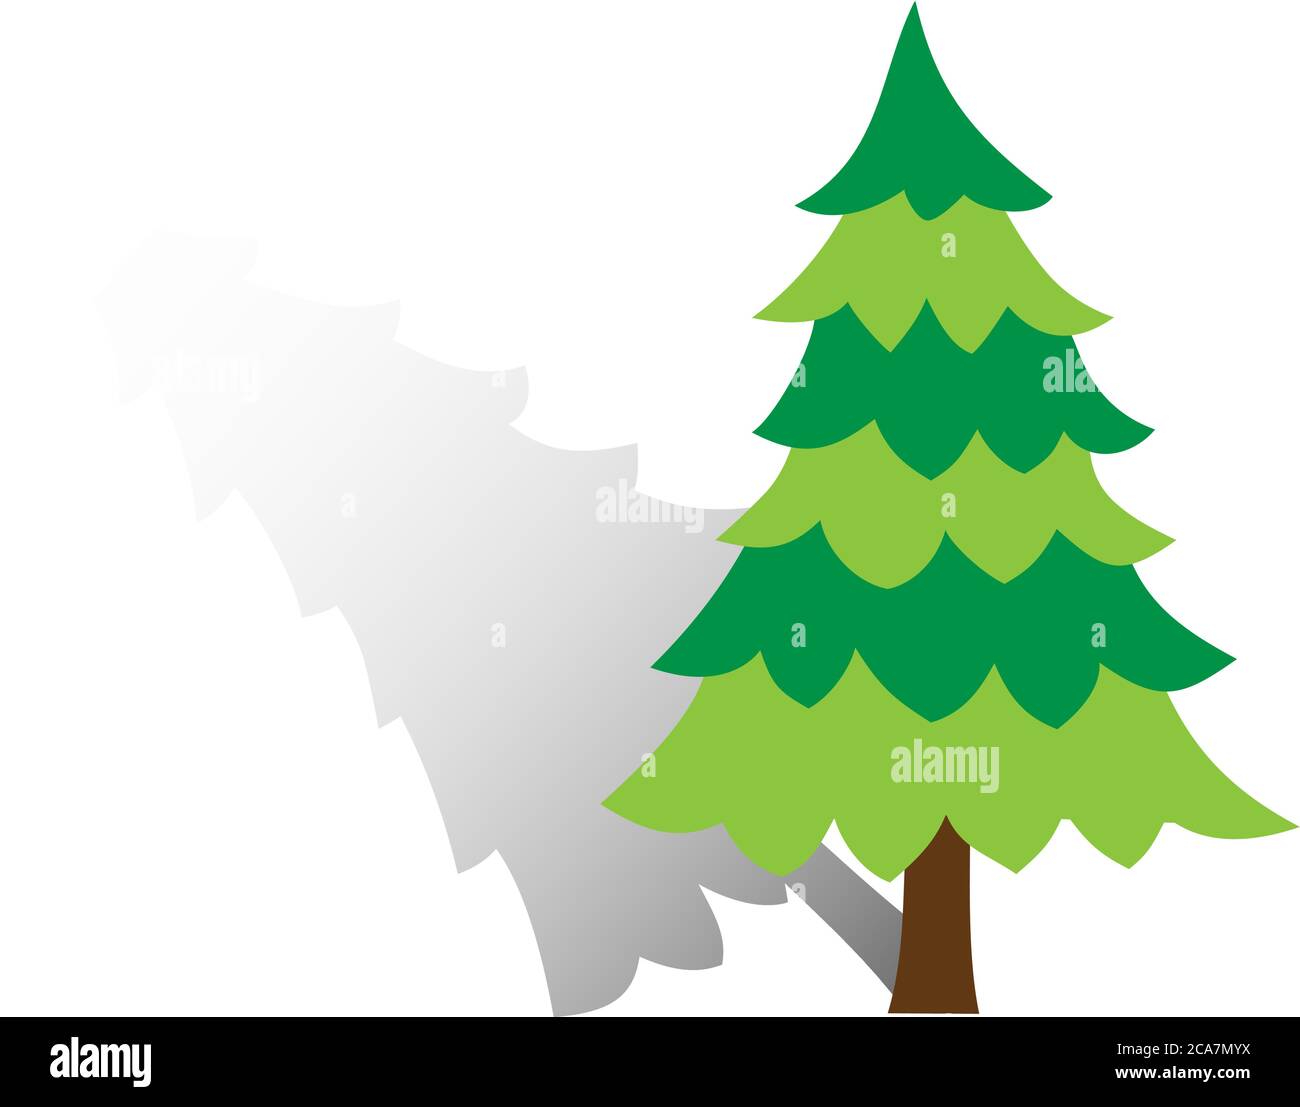 Vector Illustration. Tree, Christmas fir tree, silhouette isolated on white background. Stock Vector